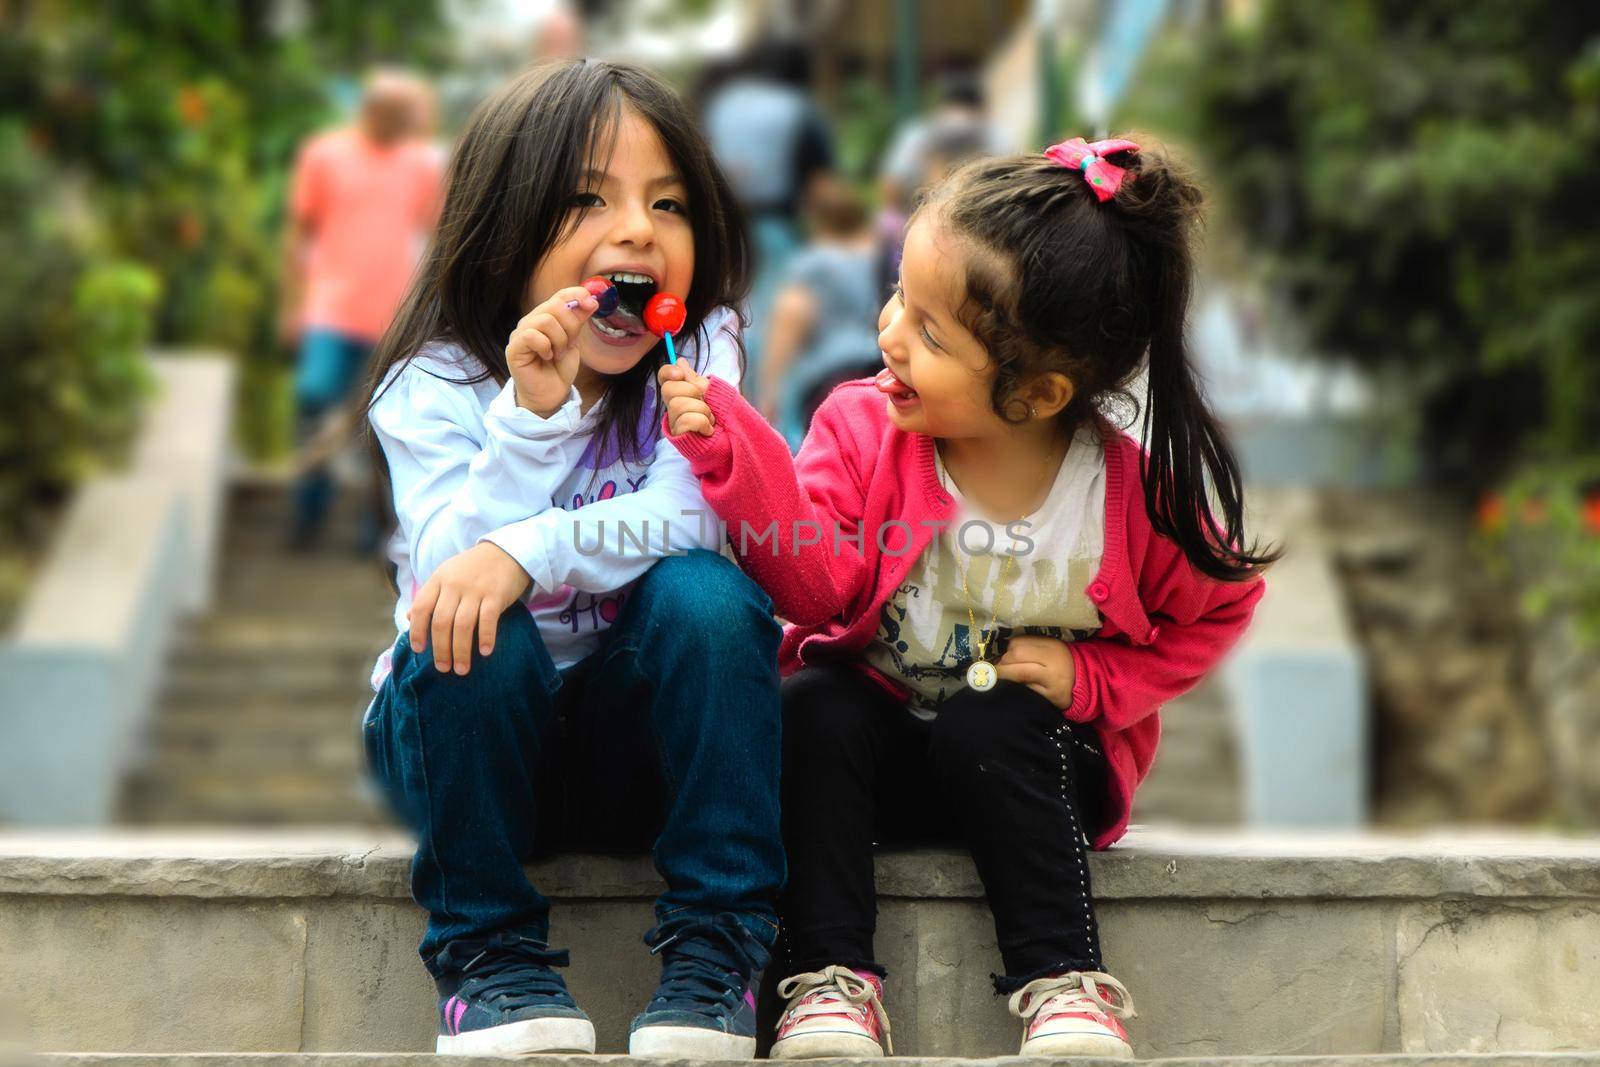 Two girls sitting and eating a lollipop in the park, summer outdoor portrait. best friends. by Peruphotoart